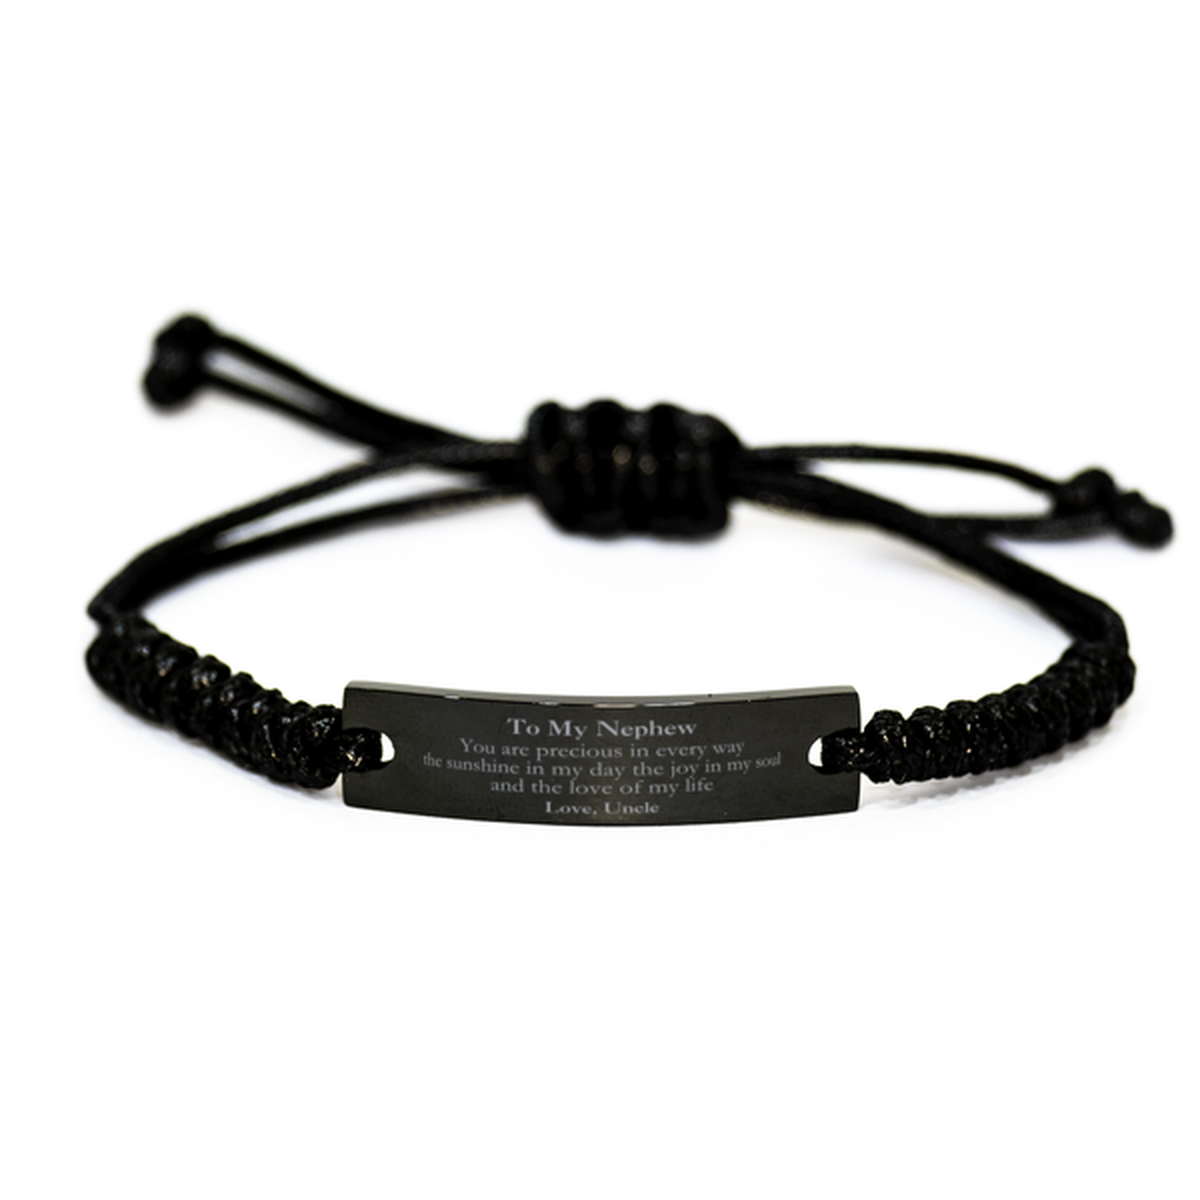 Graduation Gifts for Nephew Black Rope Bracelet Present from Uncle, Christmas Nephew Birthday Gifts Nephew You are precious in every way the sunshine in my day. Love, Uncle